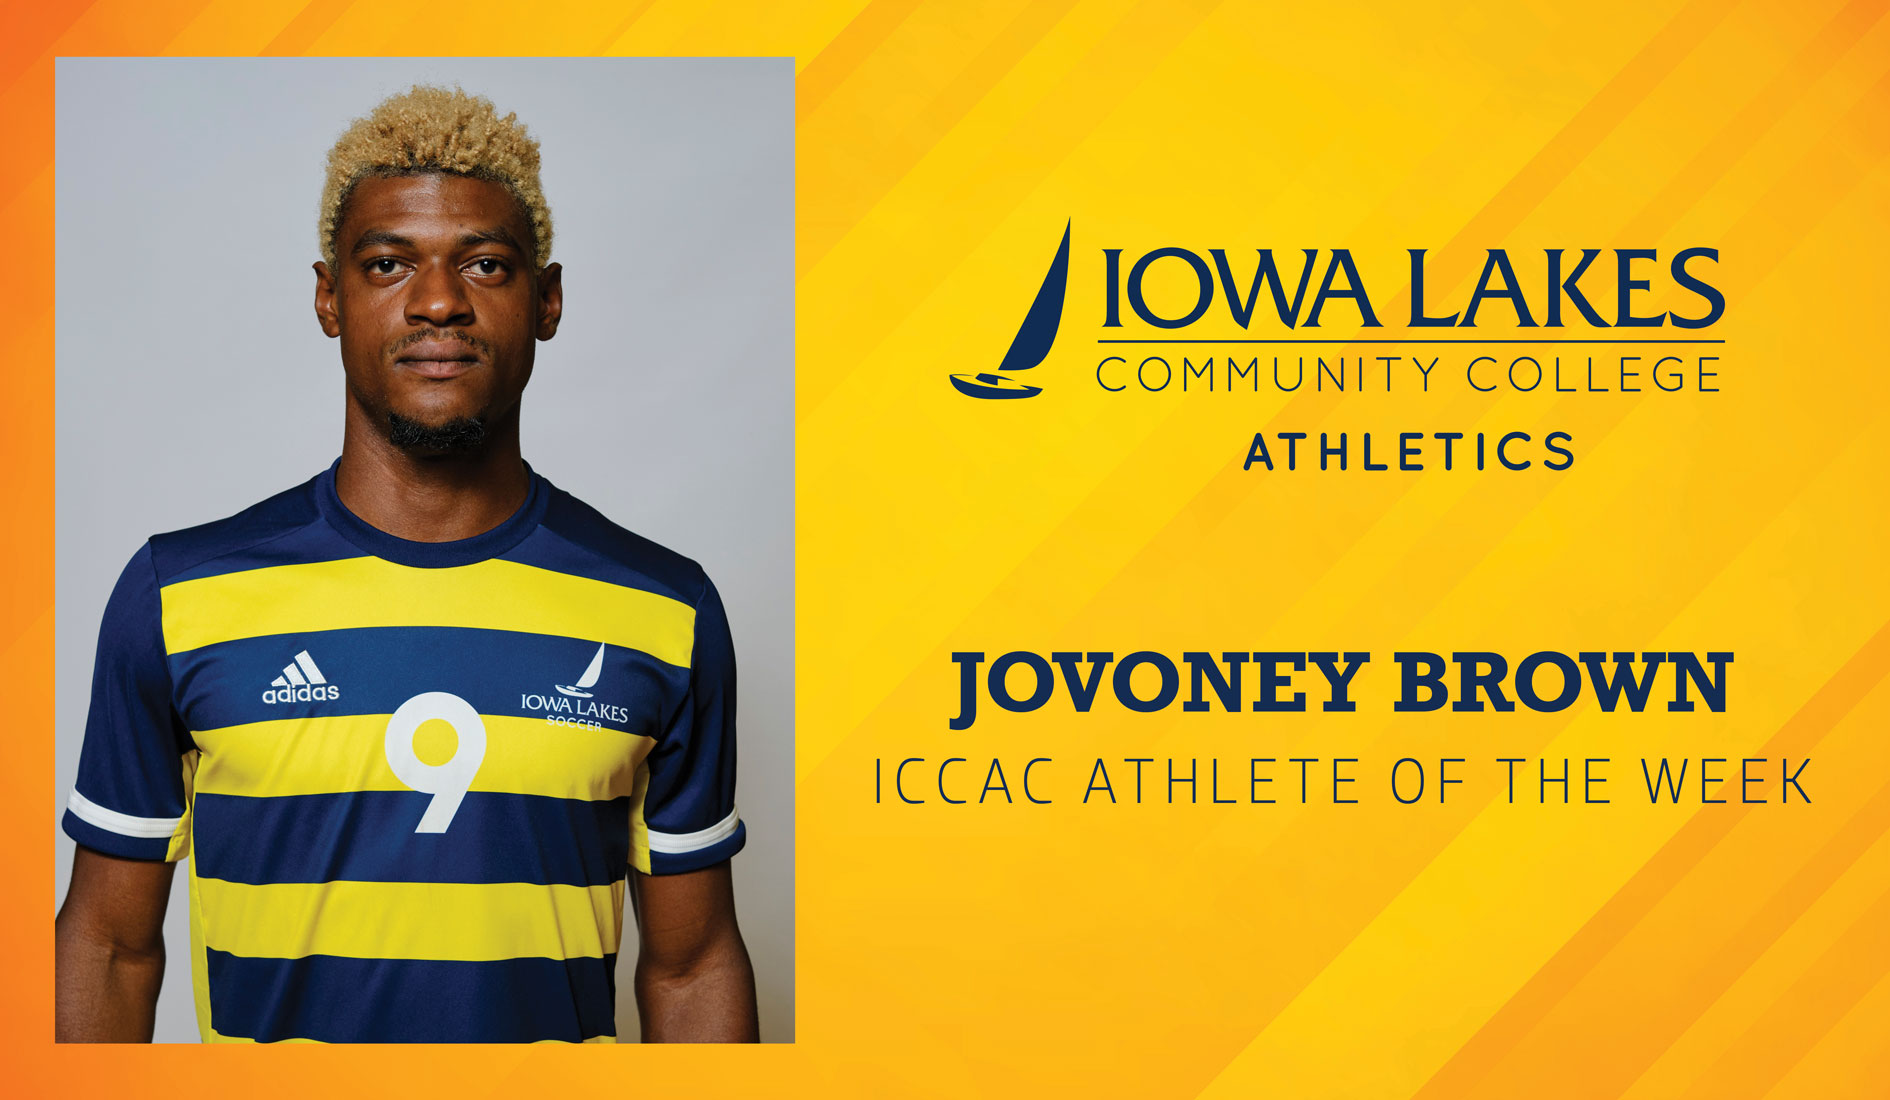 JOVONEY BROWN NAMED ICCAC PLAYER OF THE WEEK